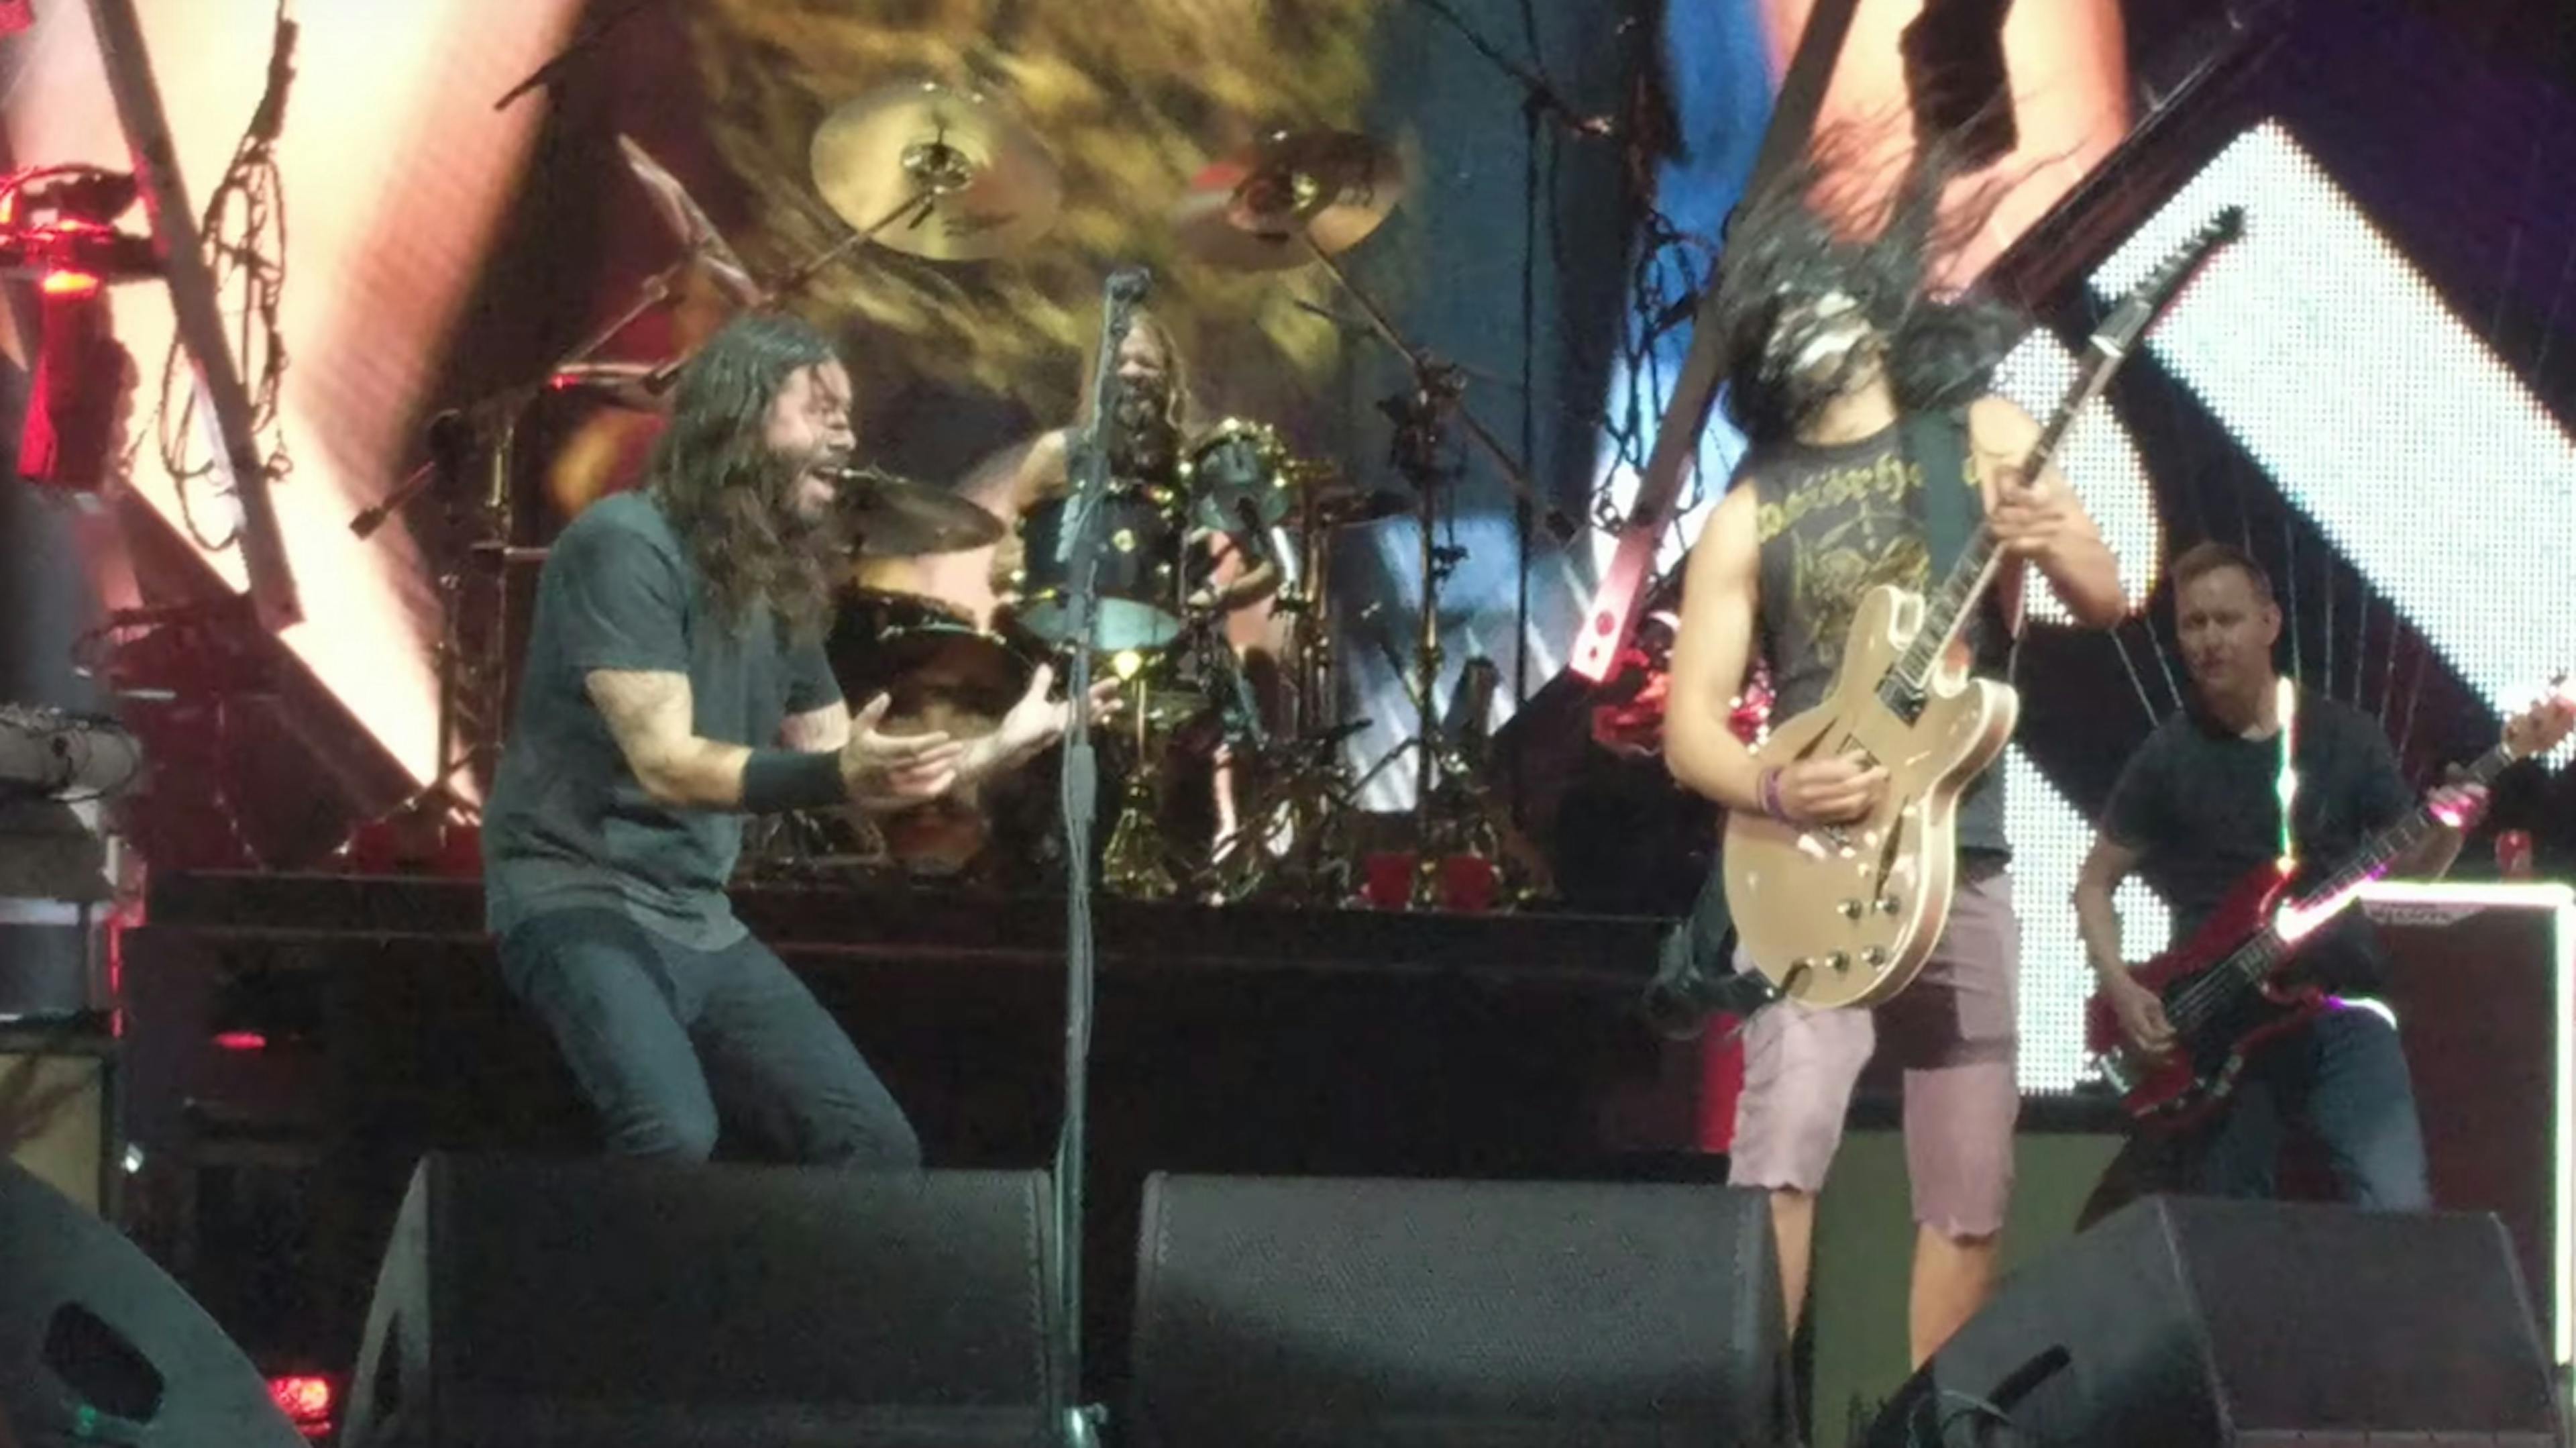 Watch Foo Fighters Shred With 'KISS Guy' Fan From Audience